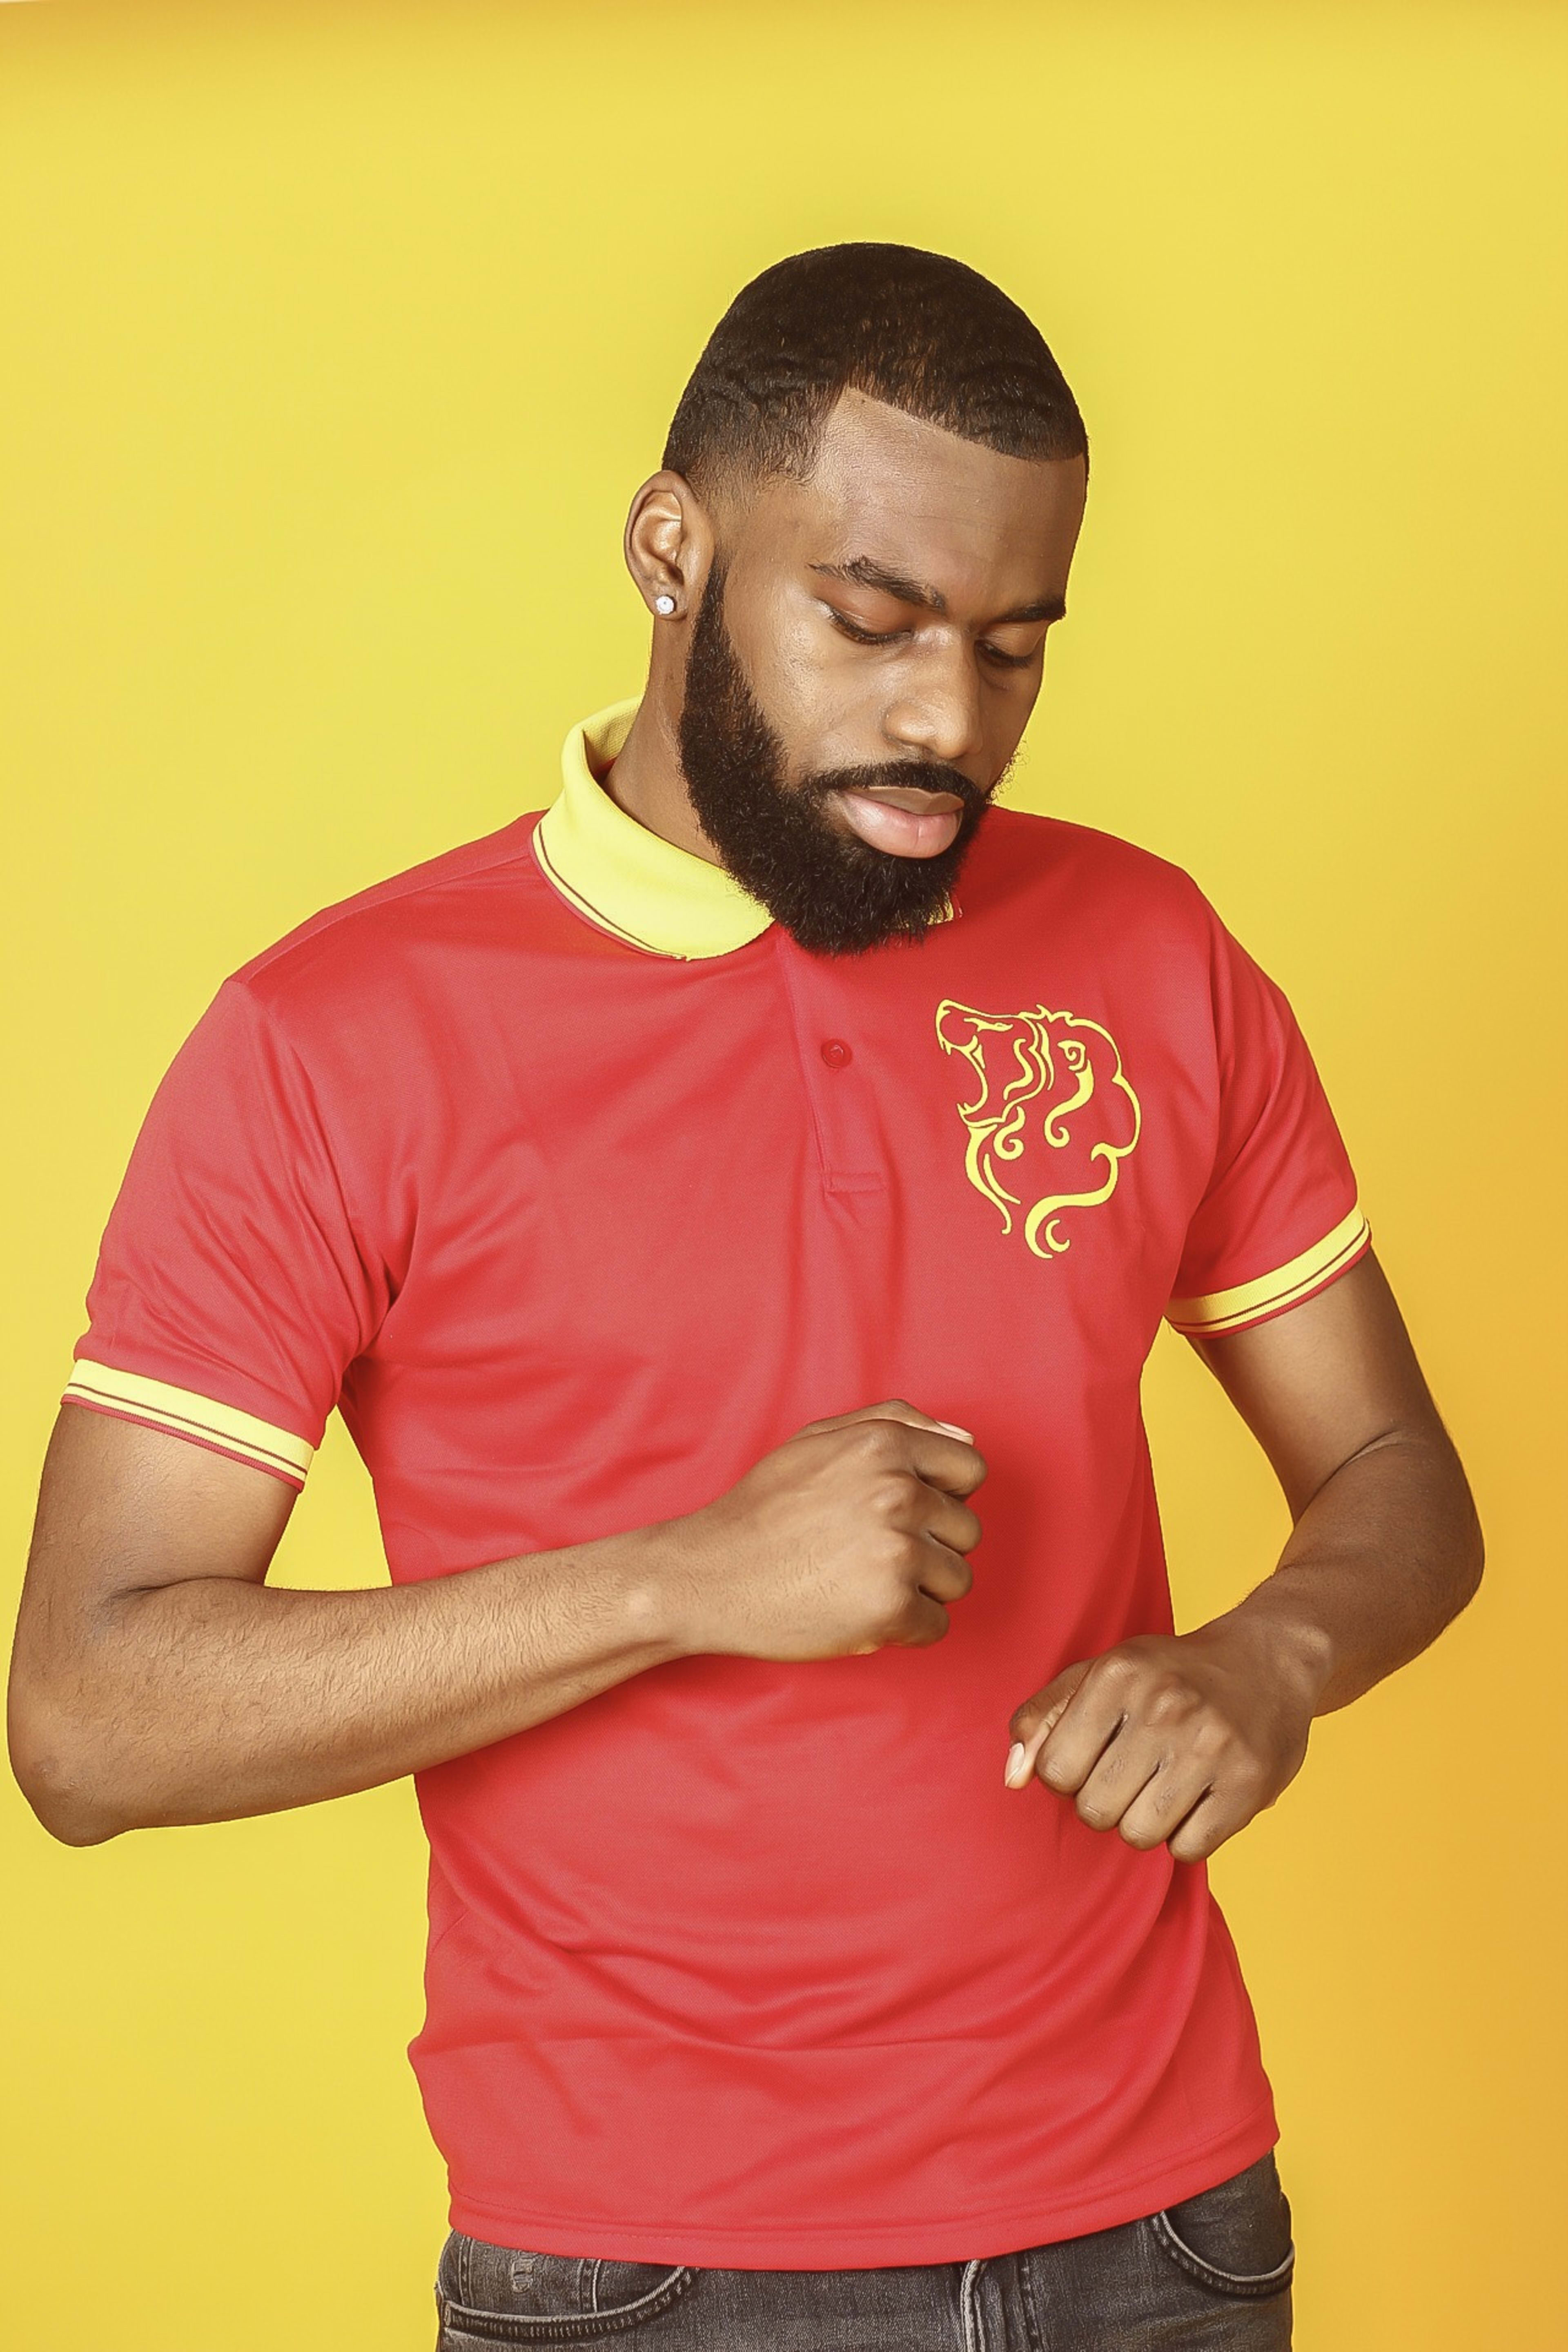 A bearded man modeling red fashion for a photoshoot.